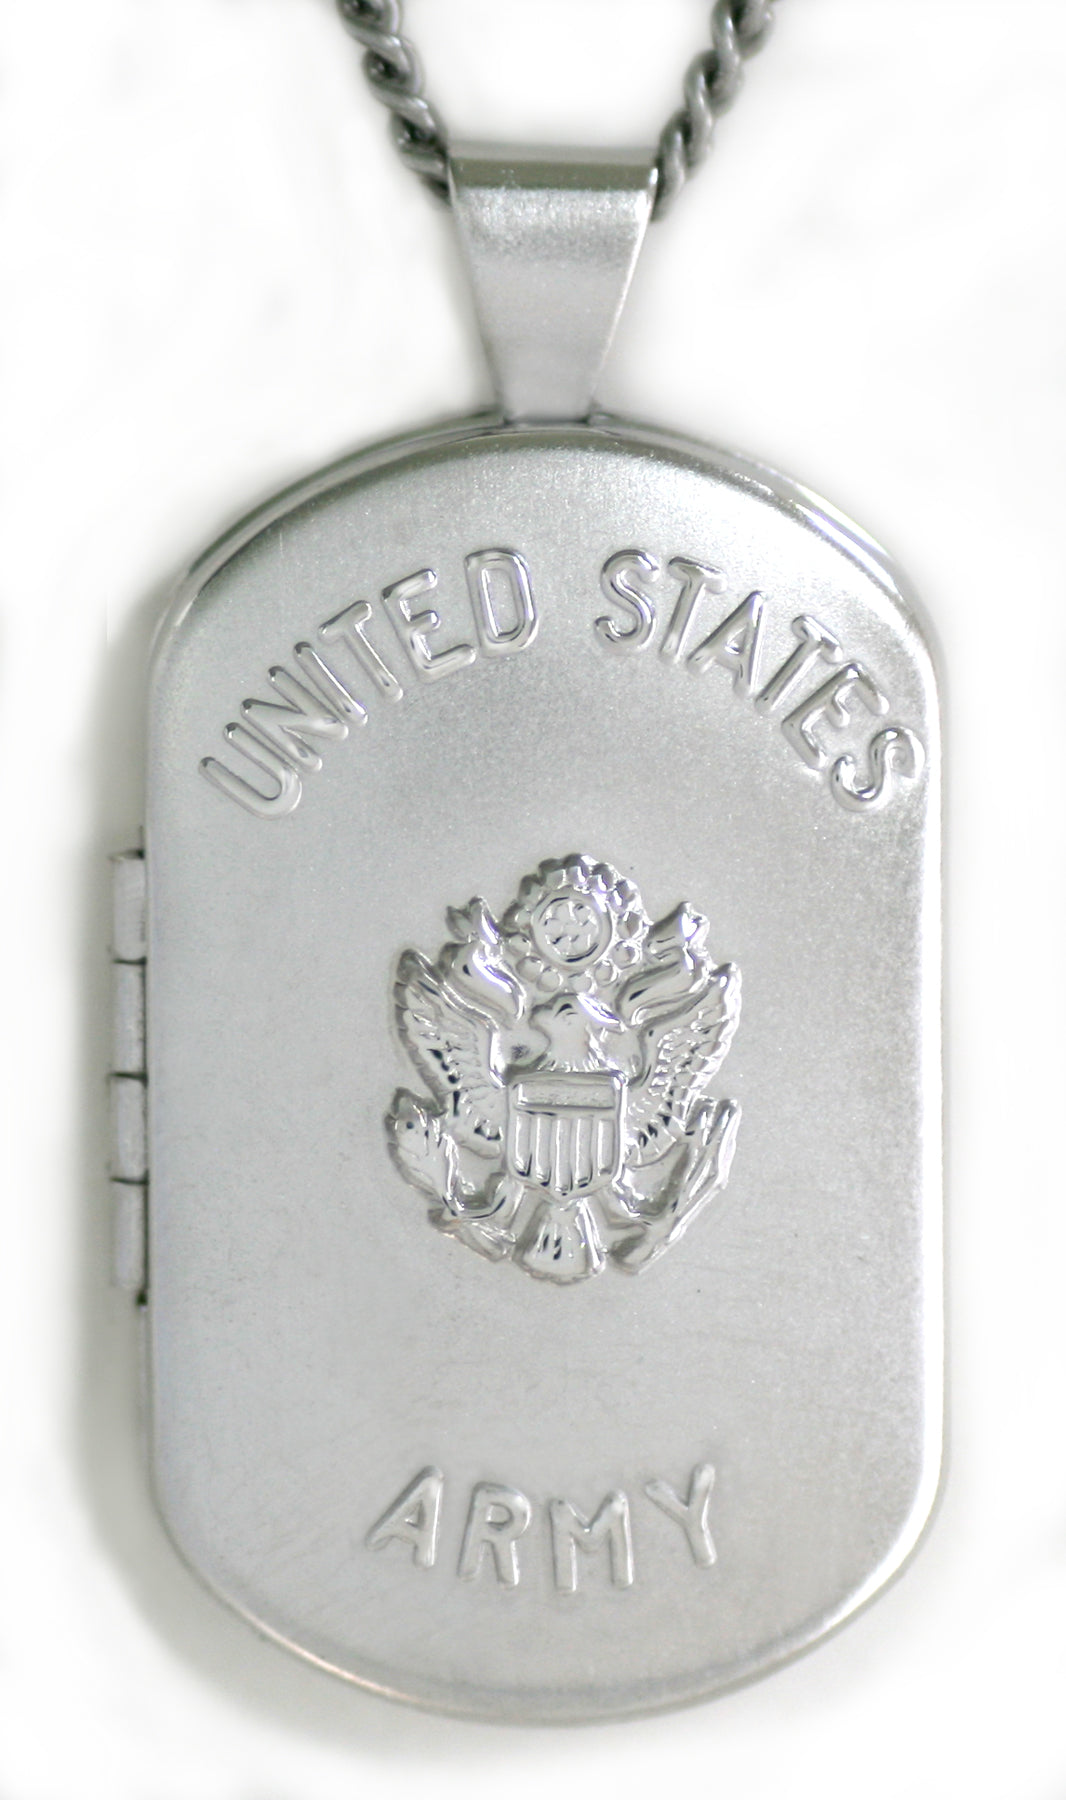 Army Dog Tag Necklace - Hand Stamped & Engraved Sterling Silver Dog Tags Necklace - US Military Deployment Gift - Army Mom Personalized Gift